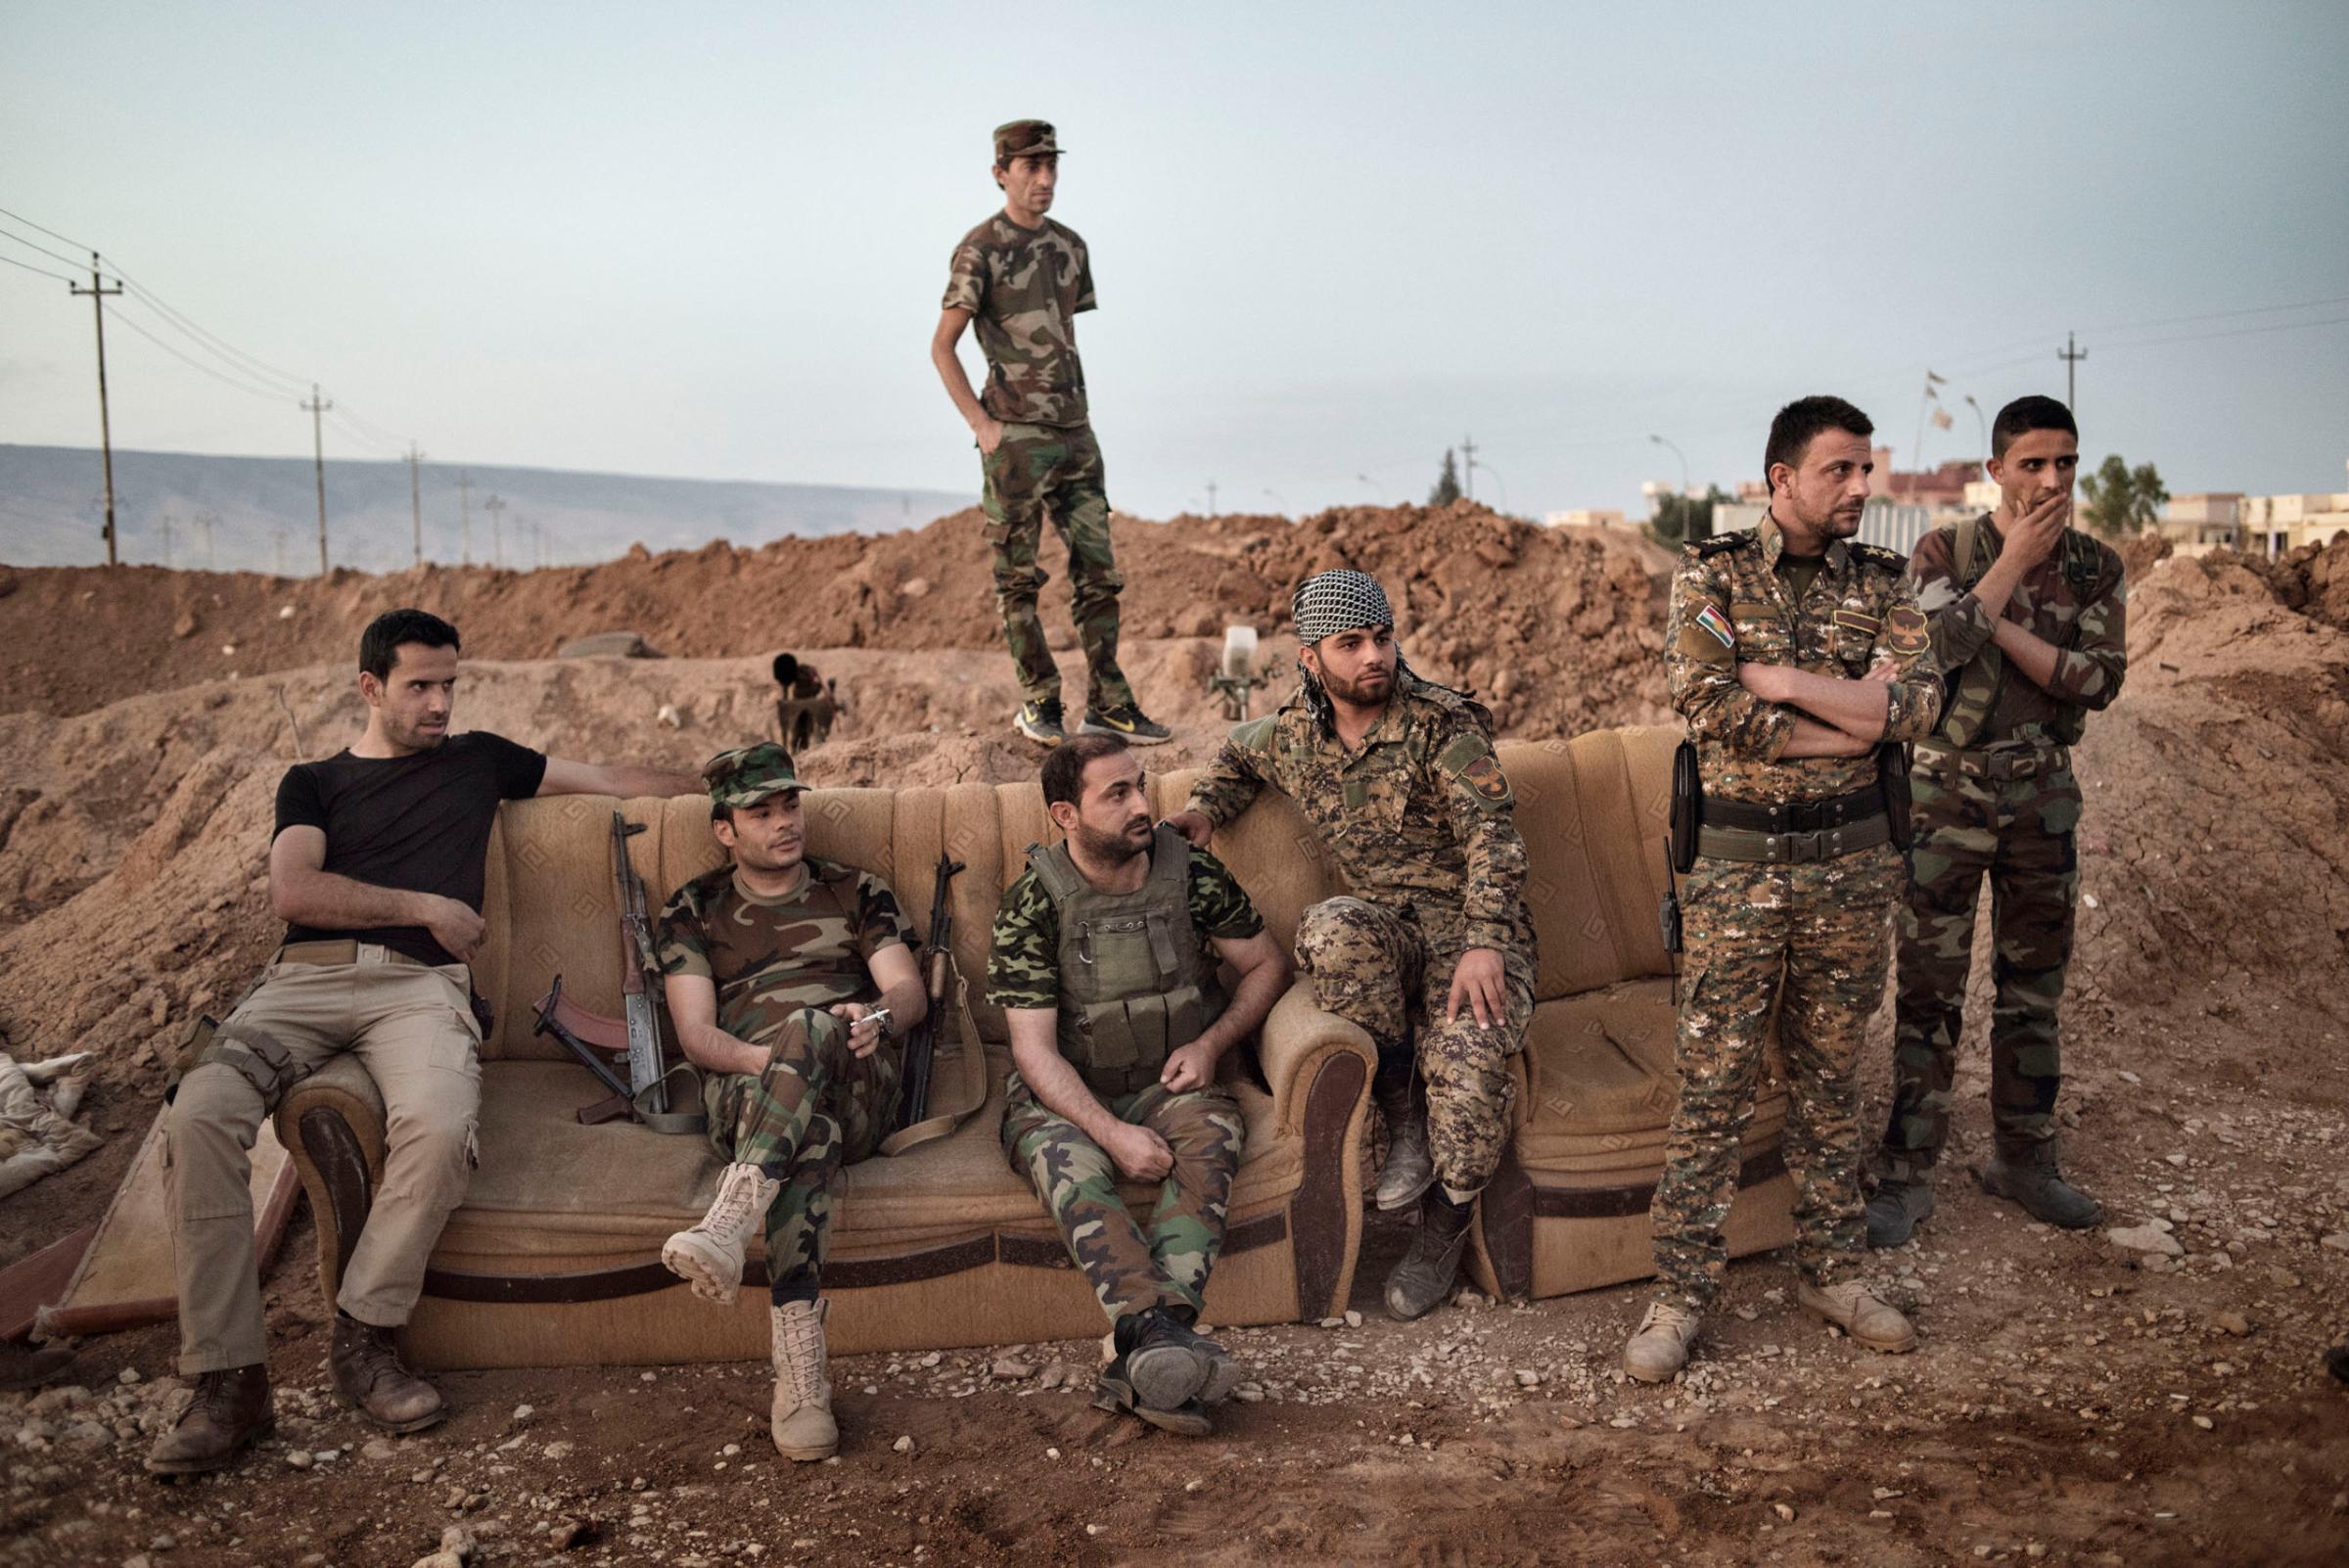 Kurdish fighters take a break while standing guard along the front line against Islamic State forces (ISIS) outside the town of Sinjar, in northern Iraq, May 12, 2016. Reclaimed by Kurdish forces in November 2015, Sinjar is a strategic point between Syria and the ISIS-held city of Mosul.